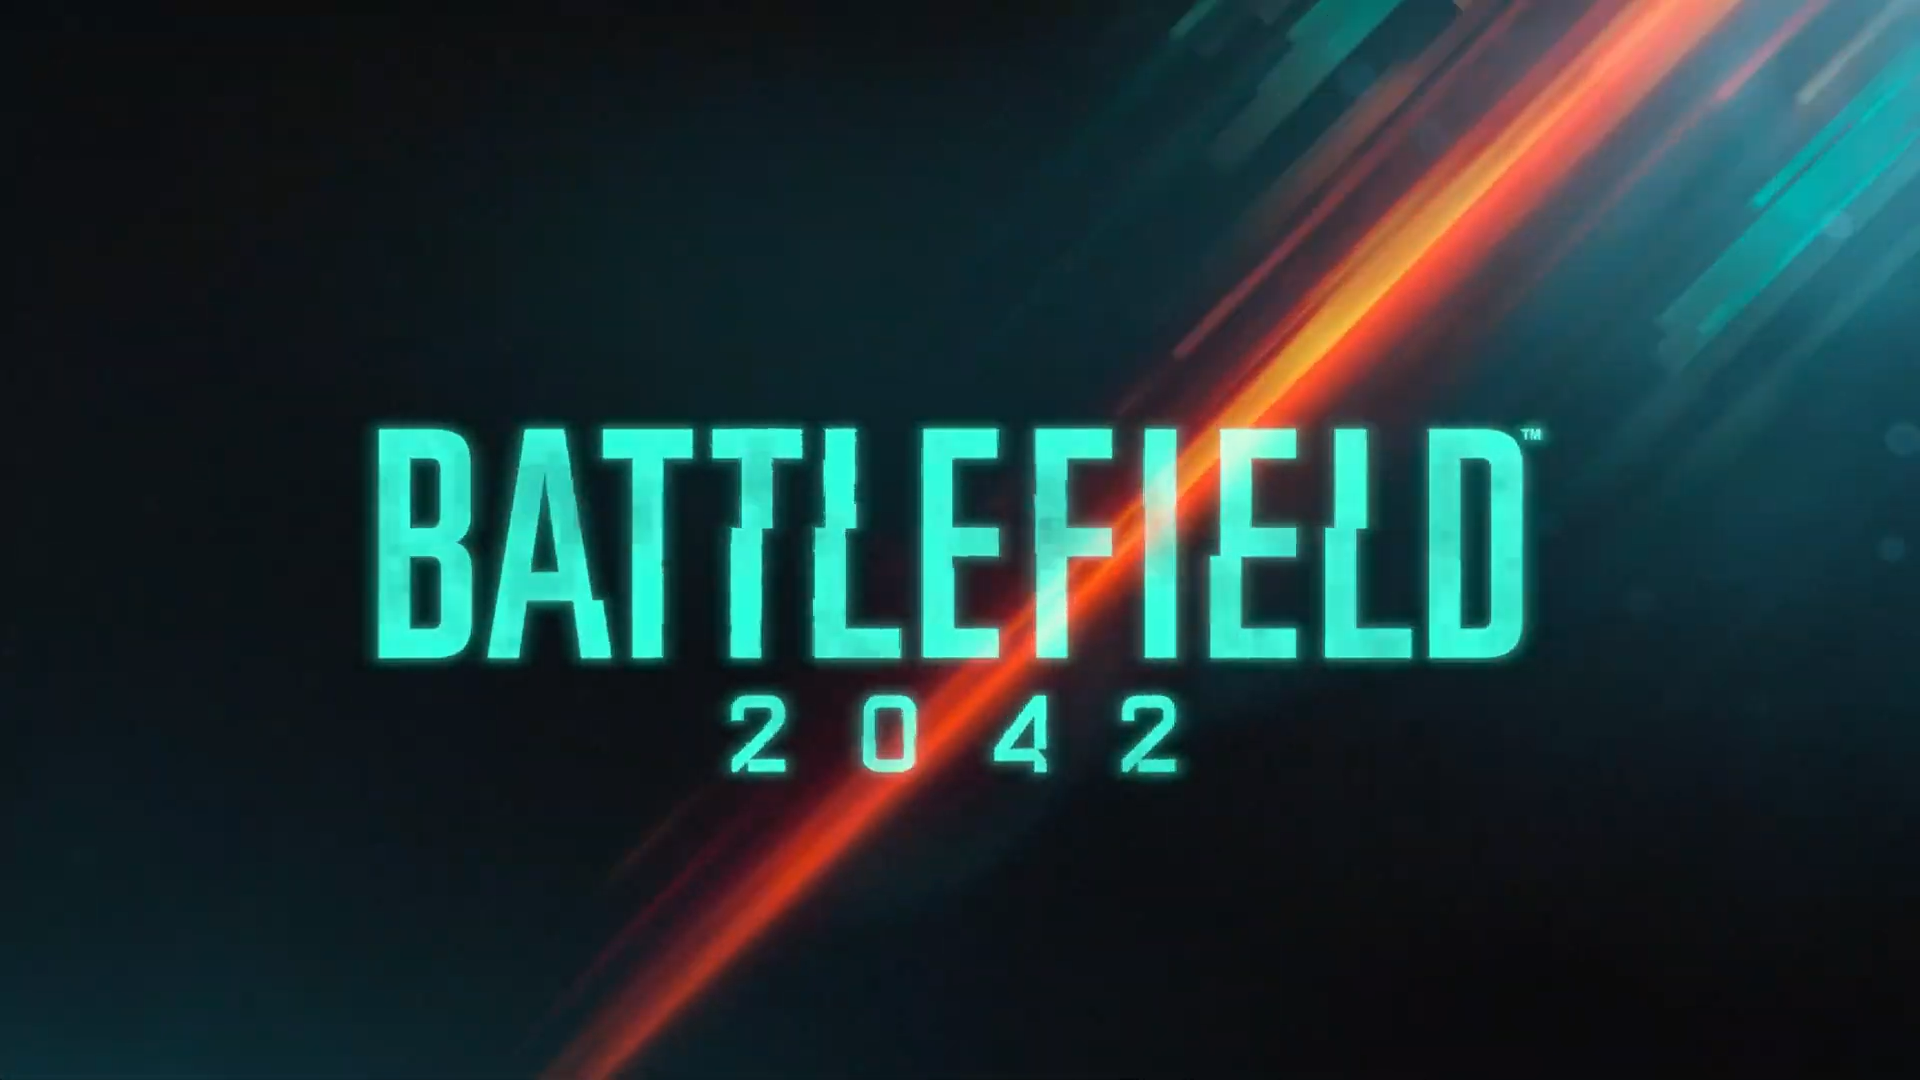 Battlefield 2042 Specialists, Battle Pass, game modes, maps and weapons explained in E3 briefing